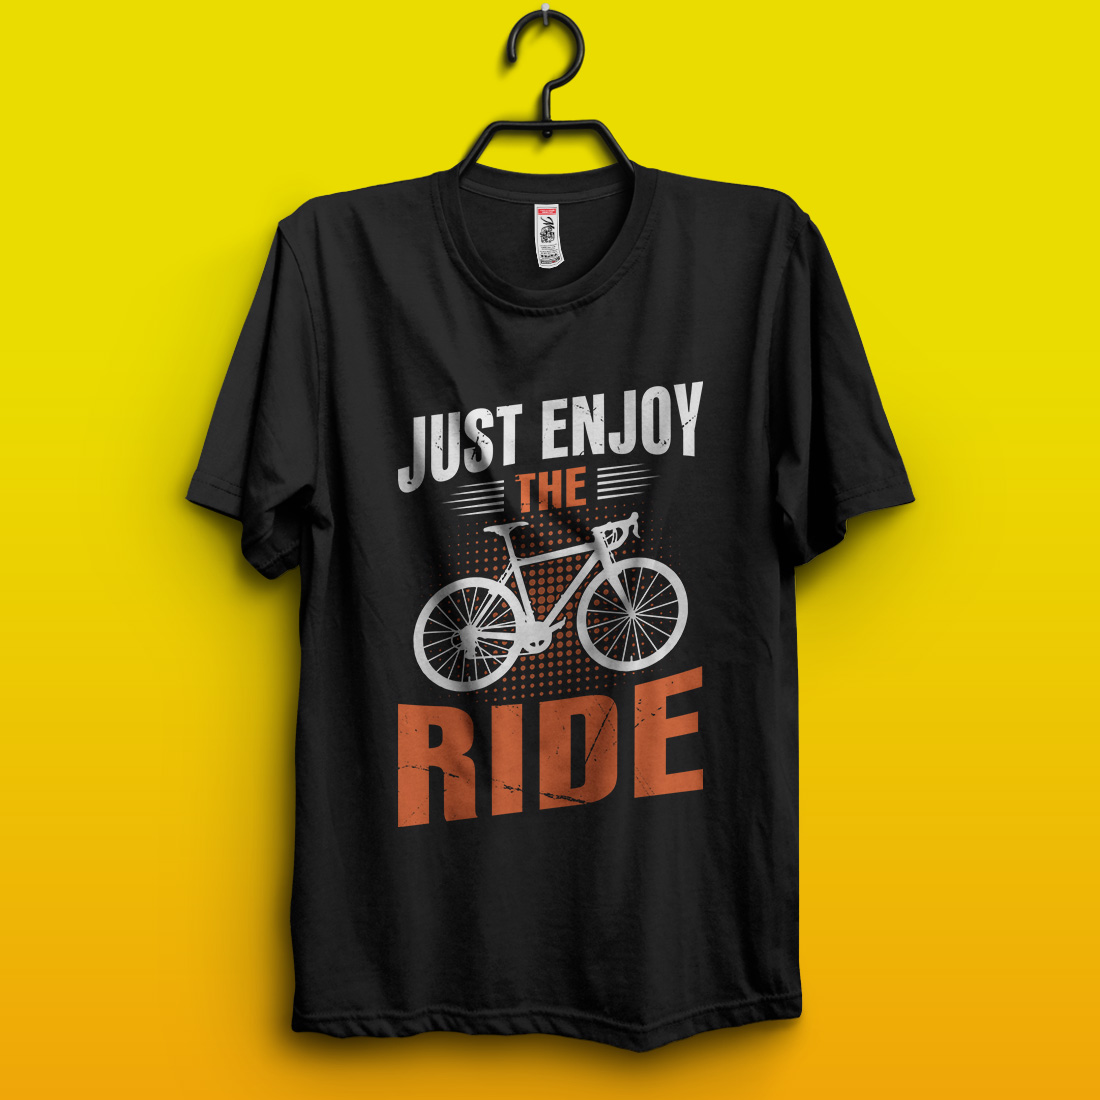 Just enjoy the ride – Cycling quotes t-shirt design for adventure lovers preview image.